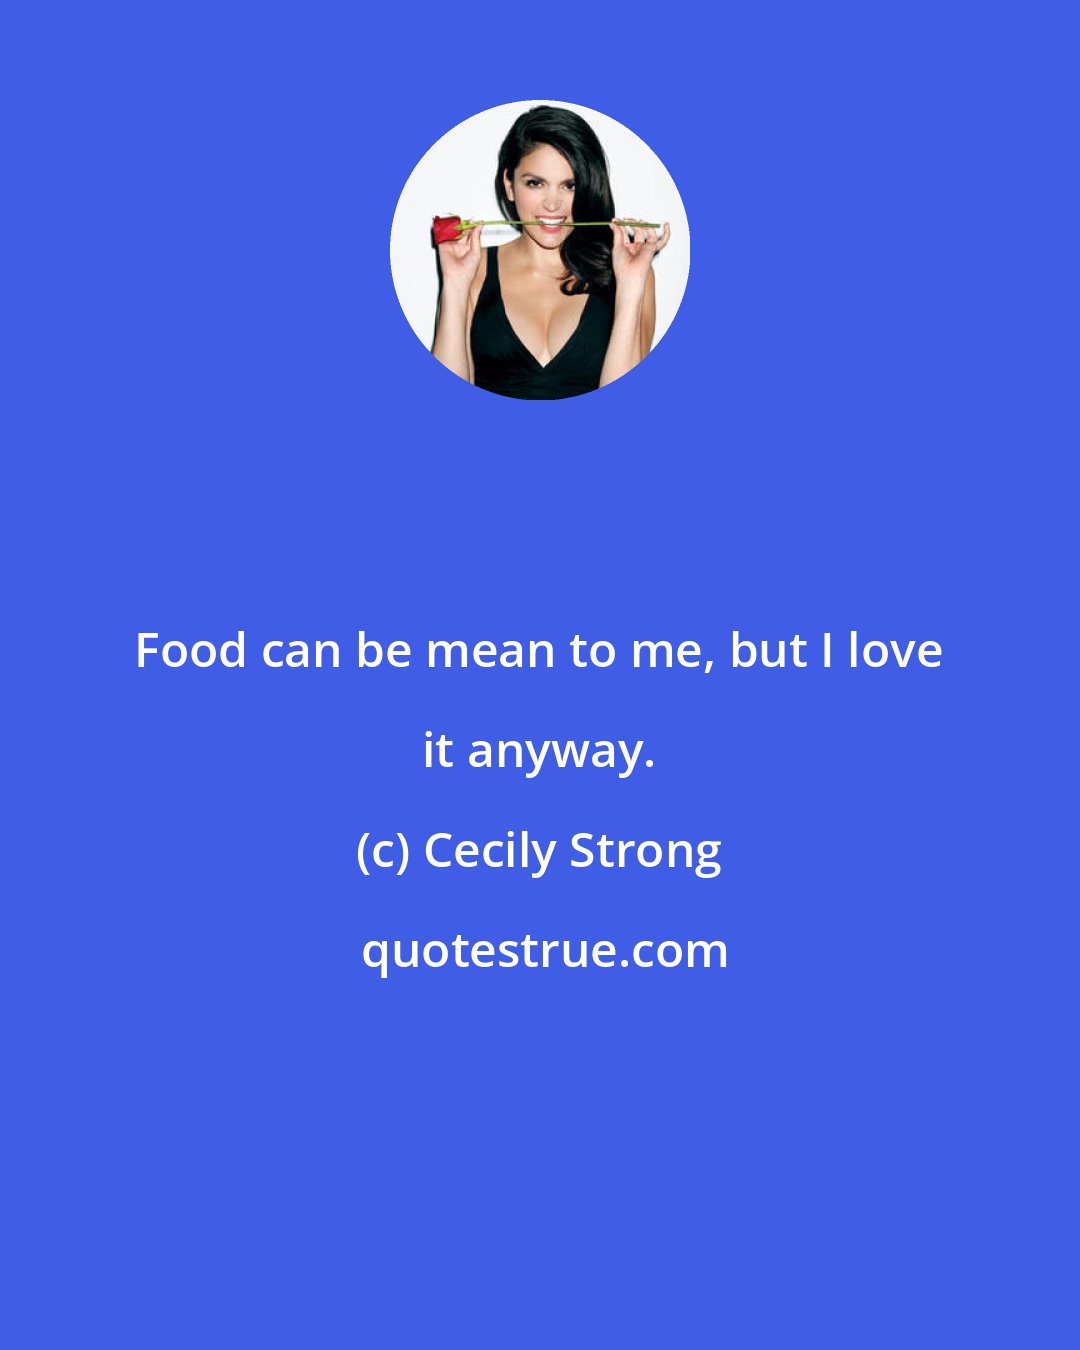 Cecily Strong: Food can be mean to me, but I love it anyway.